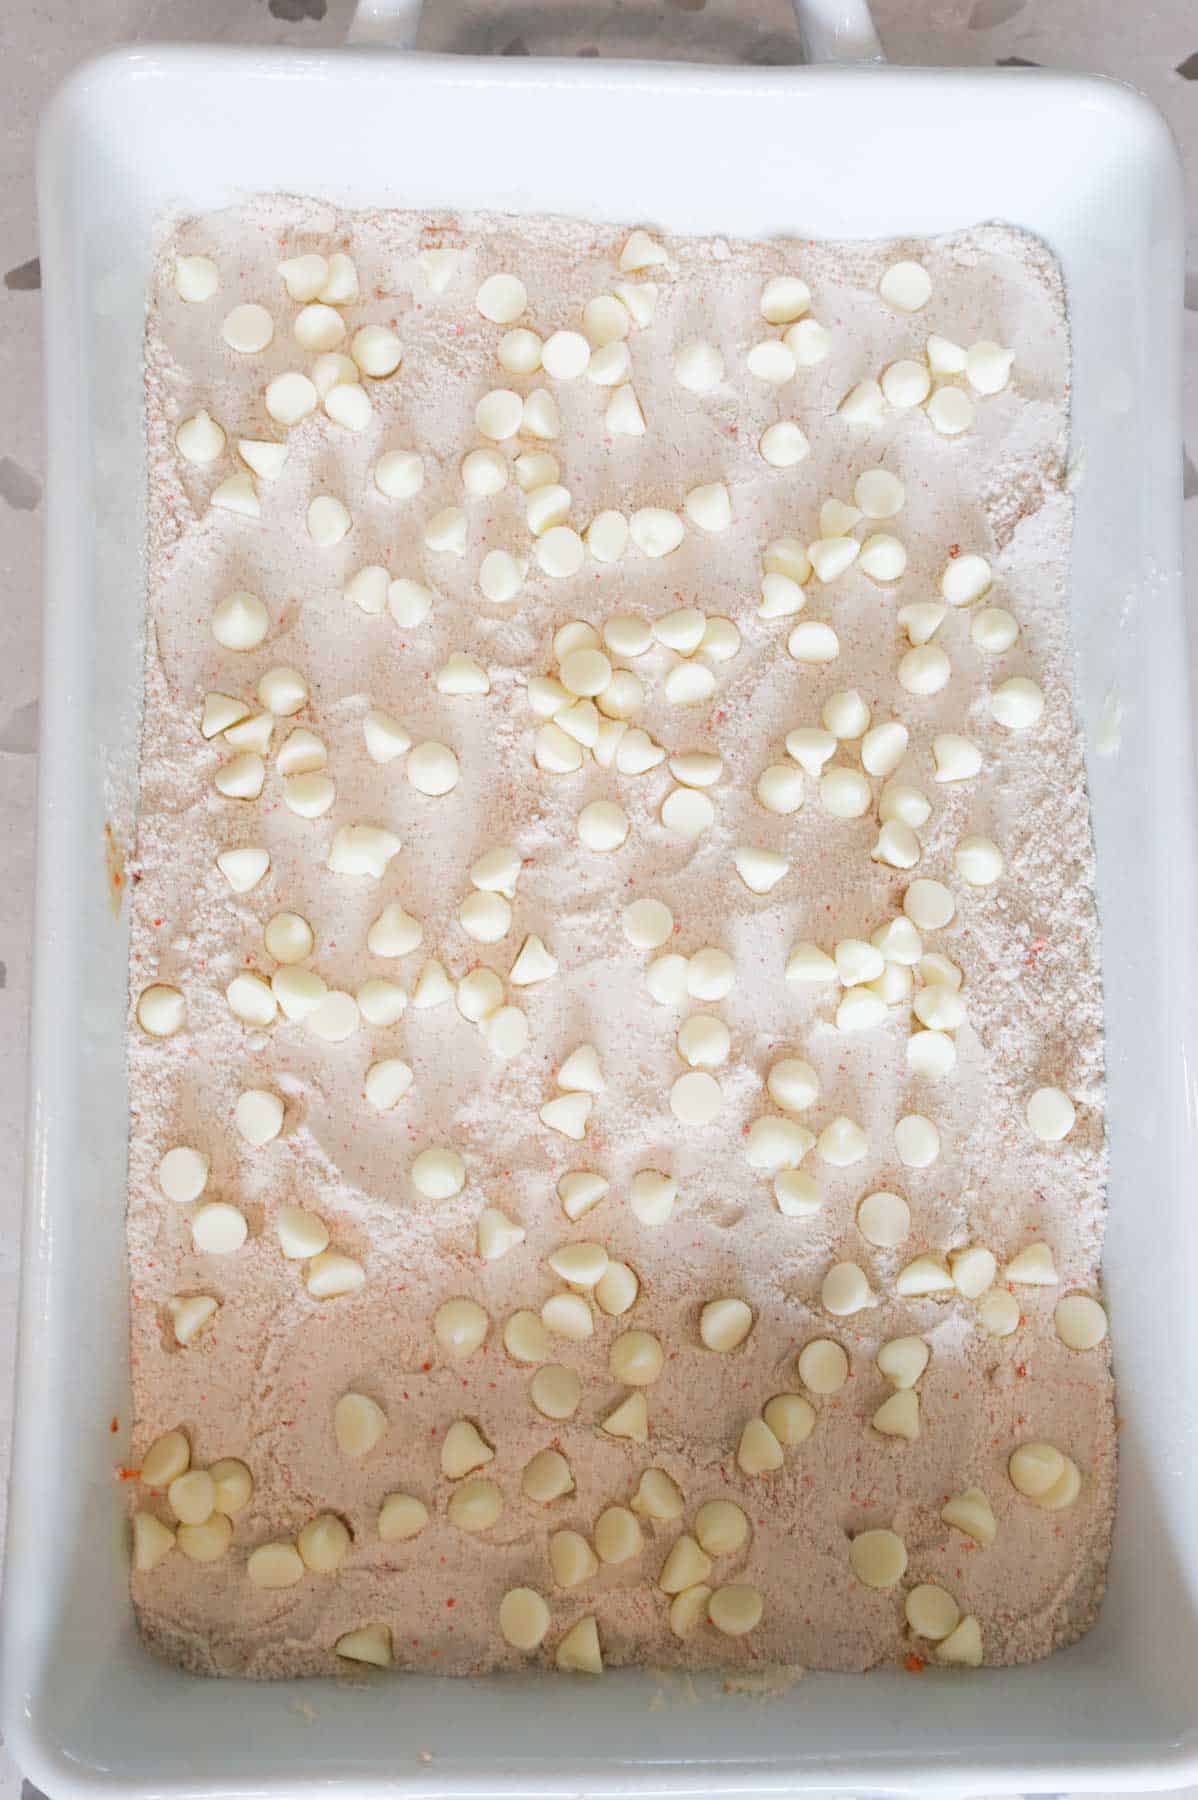 cream cheese flavoured baking bits on top of dry carrot cake mix in a baking dish